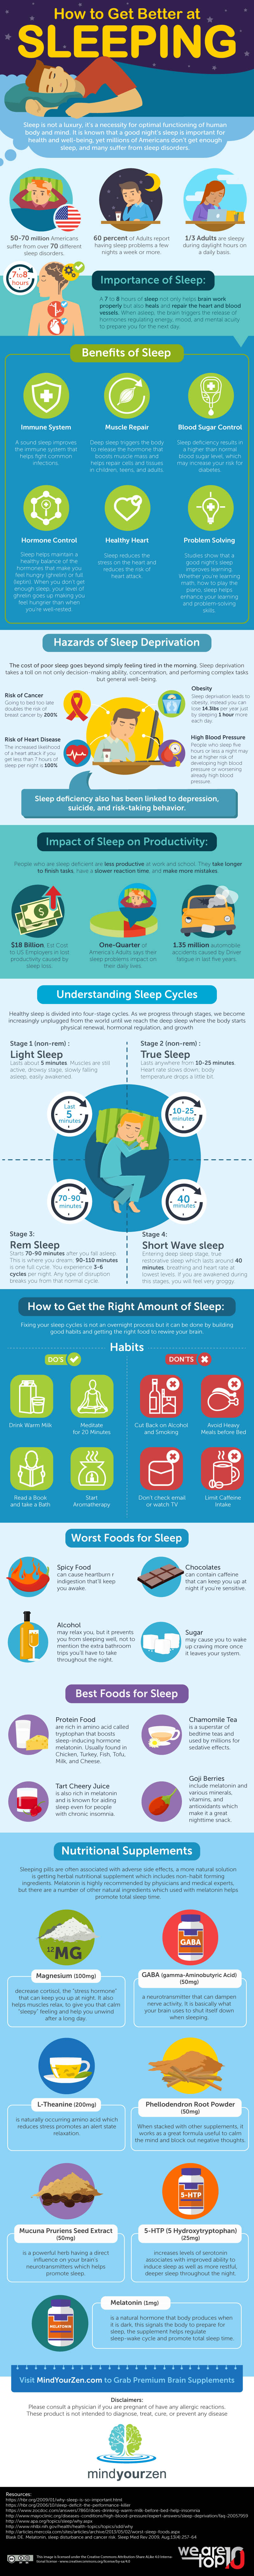 How to Get Better at Sleeping